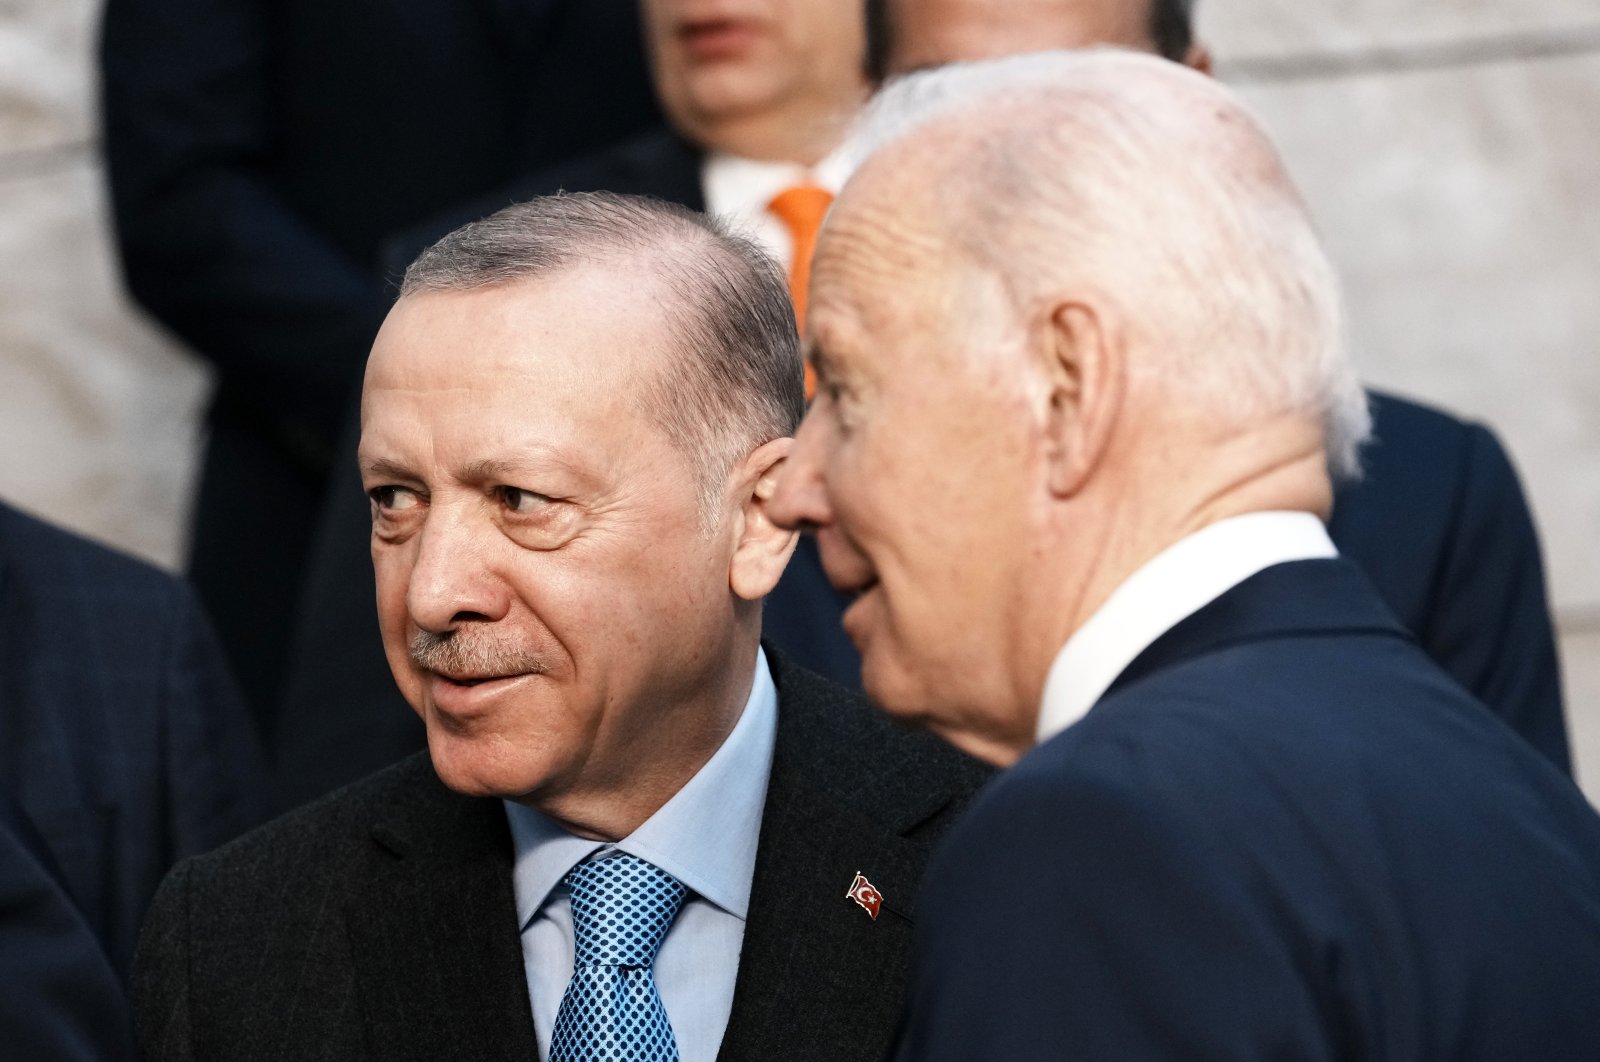 U.S. President Joe Biden speaks with President Recep Tayyip Erdoğan at a group photo during an extraordinary NATO summit at NATO headquarters in Brussels, Belgium, March 24, 2022. (AP Photo)